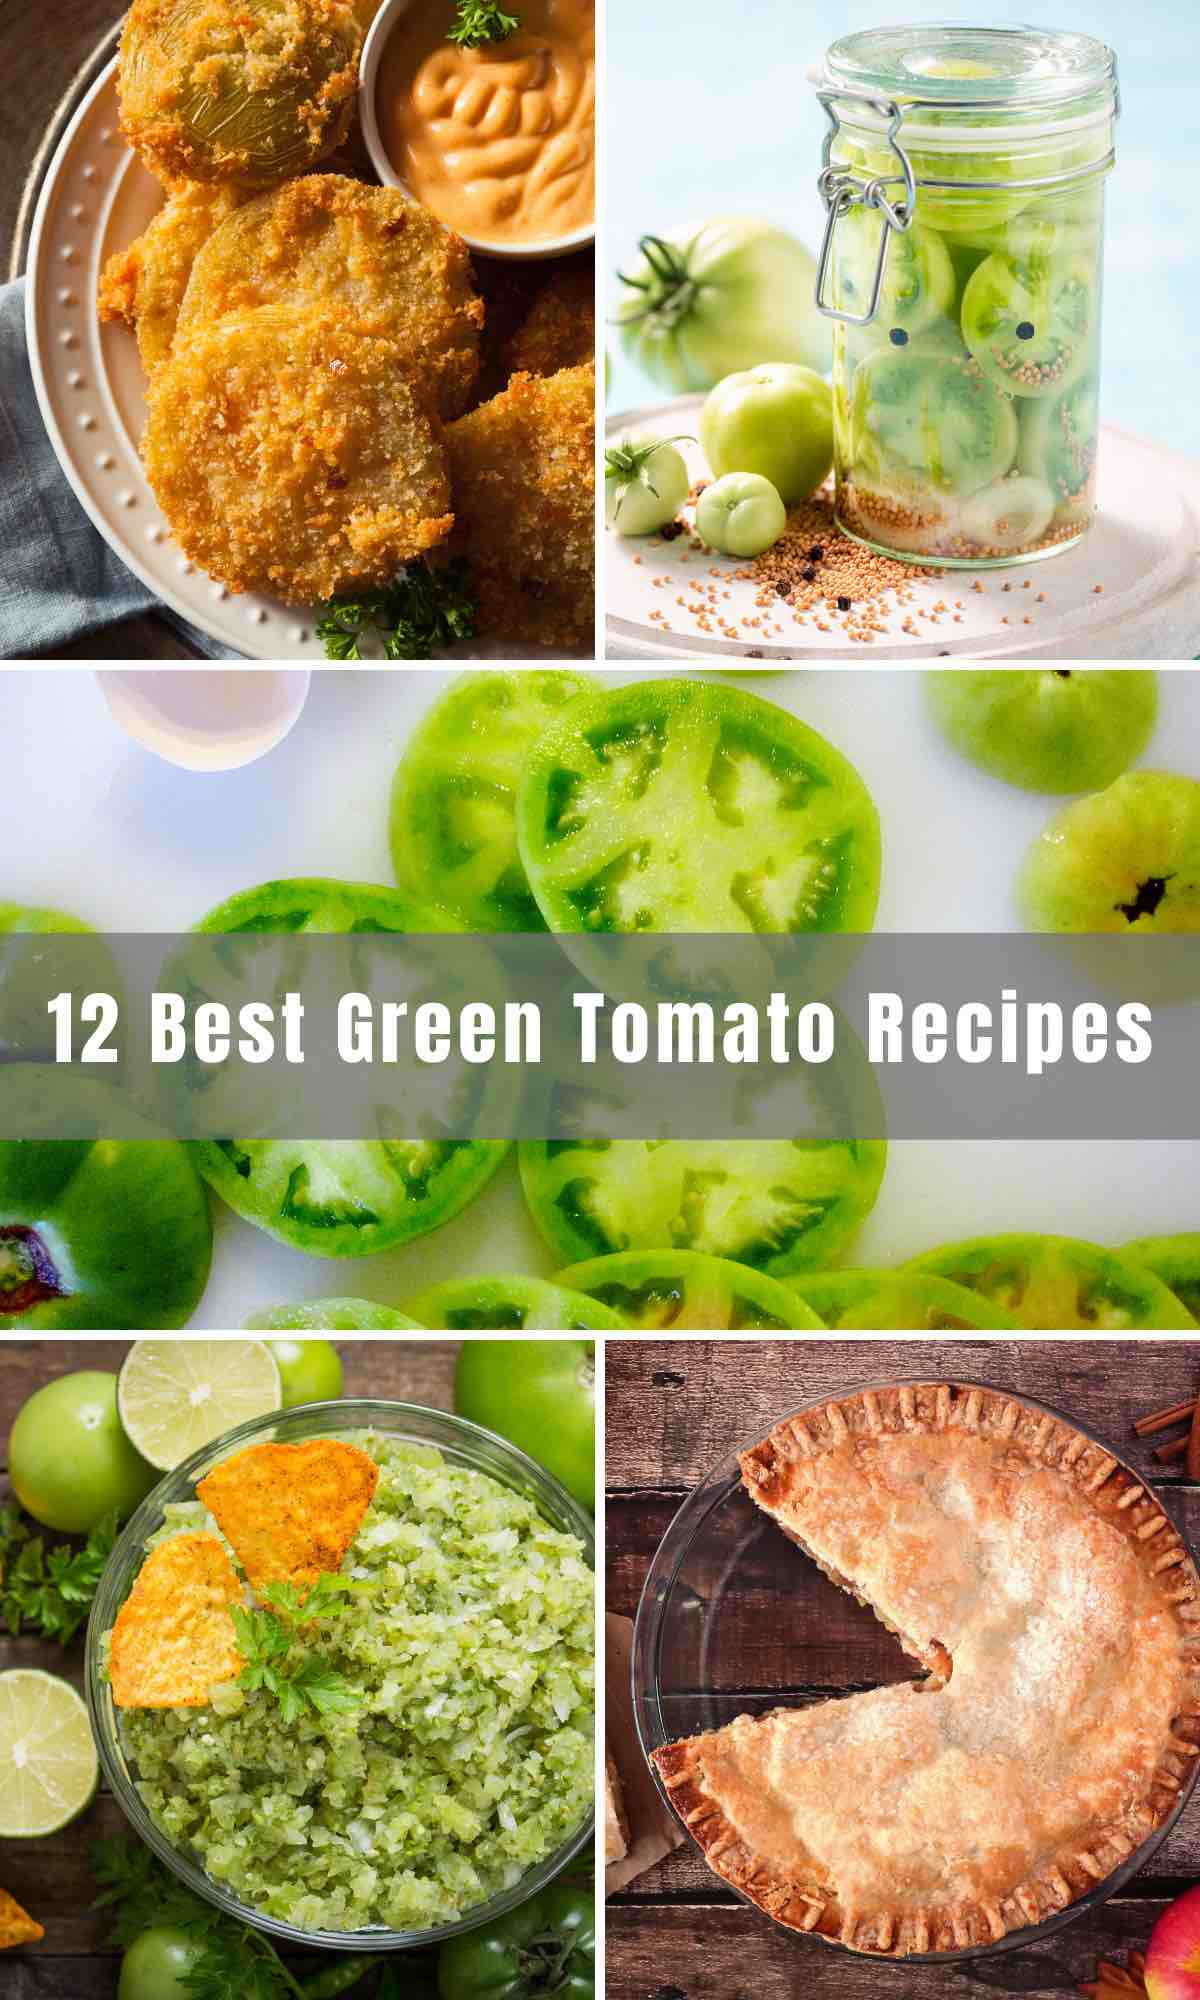 Did you know that unripe green tomatoes can star in so many ways: fried, oven-baked, used in relish, salsa, and lots more. We’ll take you through 12 Best Green Tomato Recipes that will make you eat more of this healthy veggie.